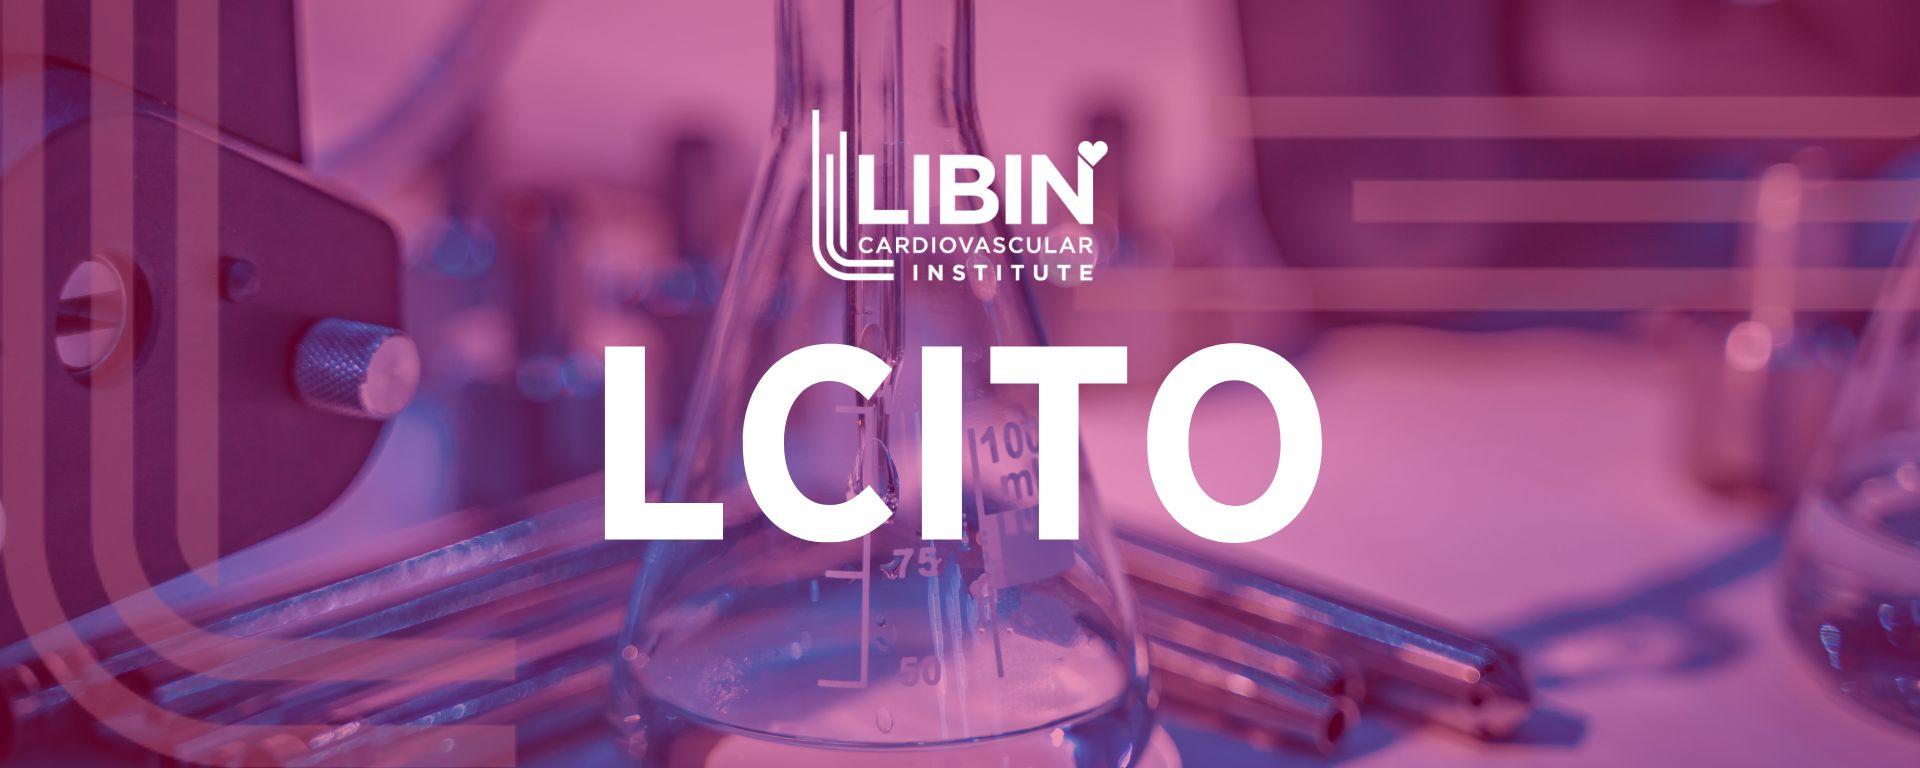 pink background with text LCITO and the Libin Cardiovascular Institute logo